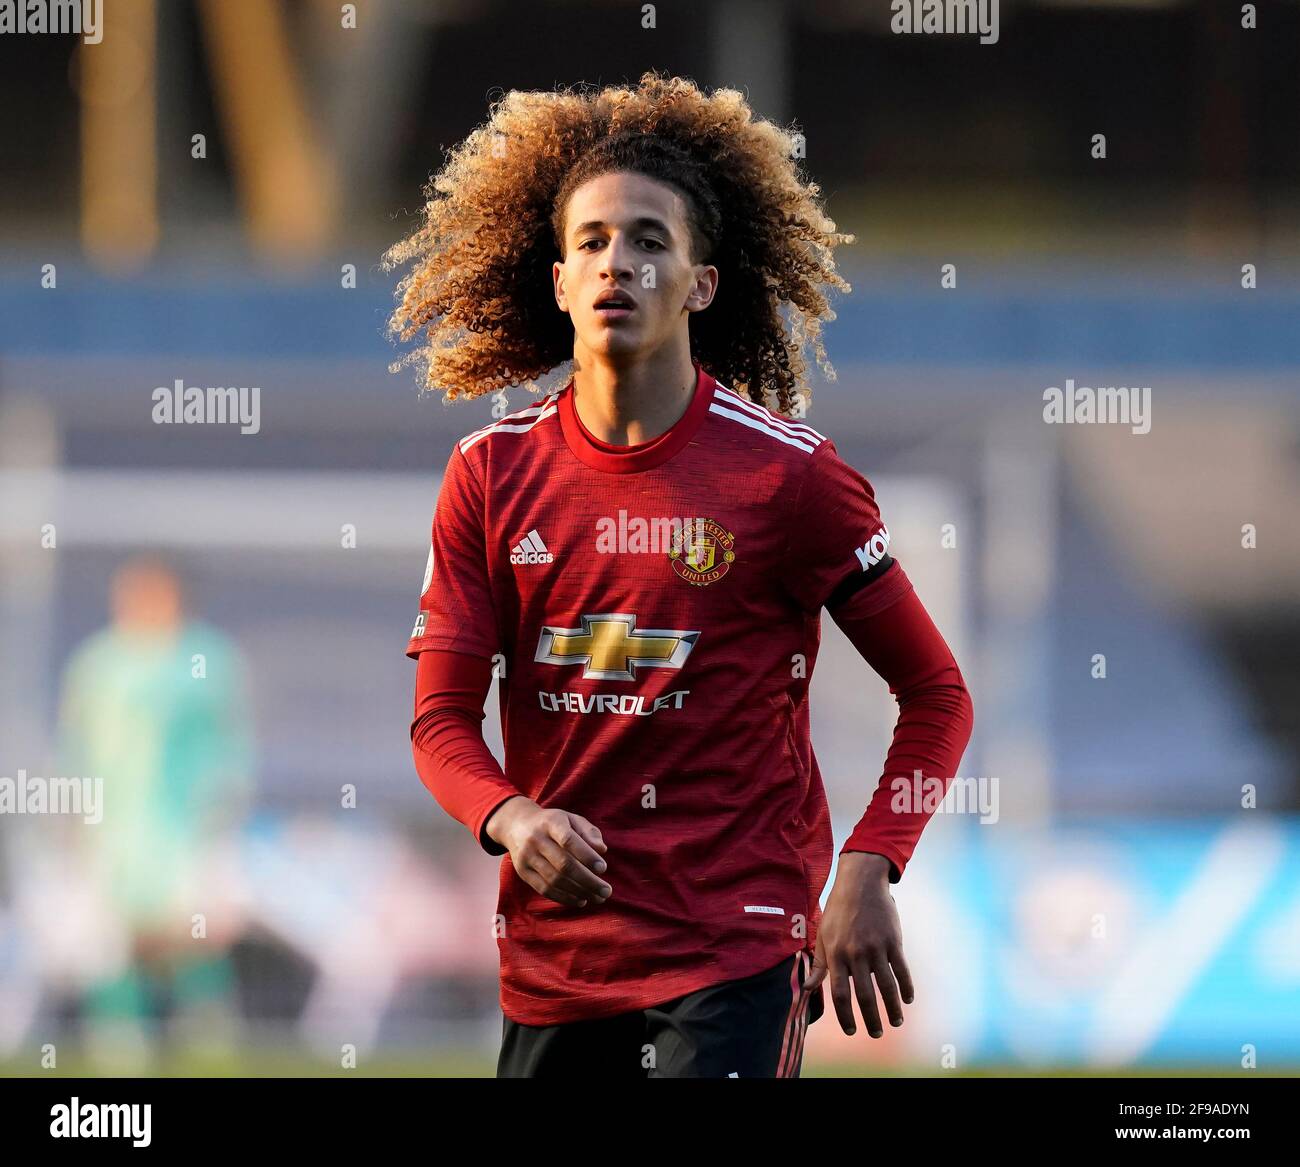 Manchester, England, 16th April 2021. Hannibal Mejbri of Manchester United during the Professional Development League match at Academy Stadium, Manchester. Picture credit should read: Andrew Yates / Sportimage Stock Photo